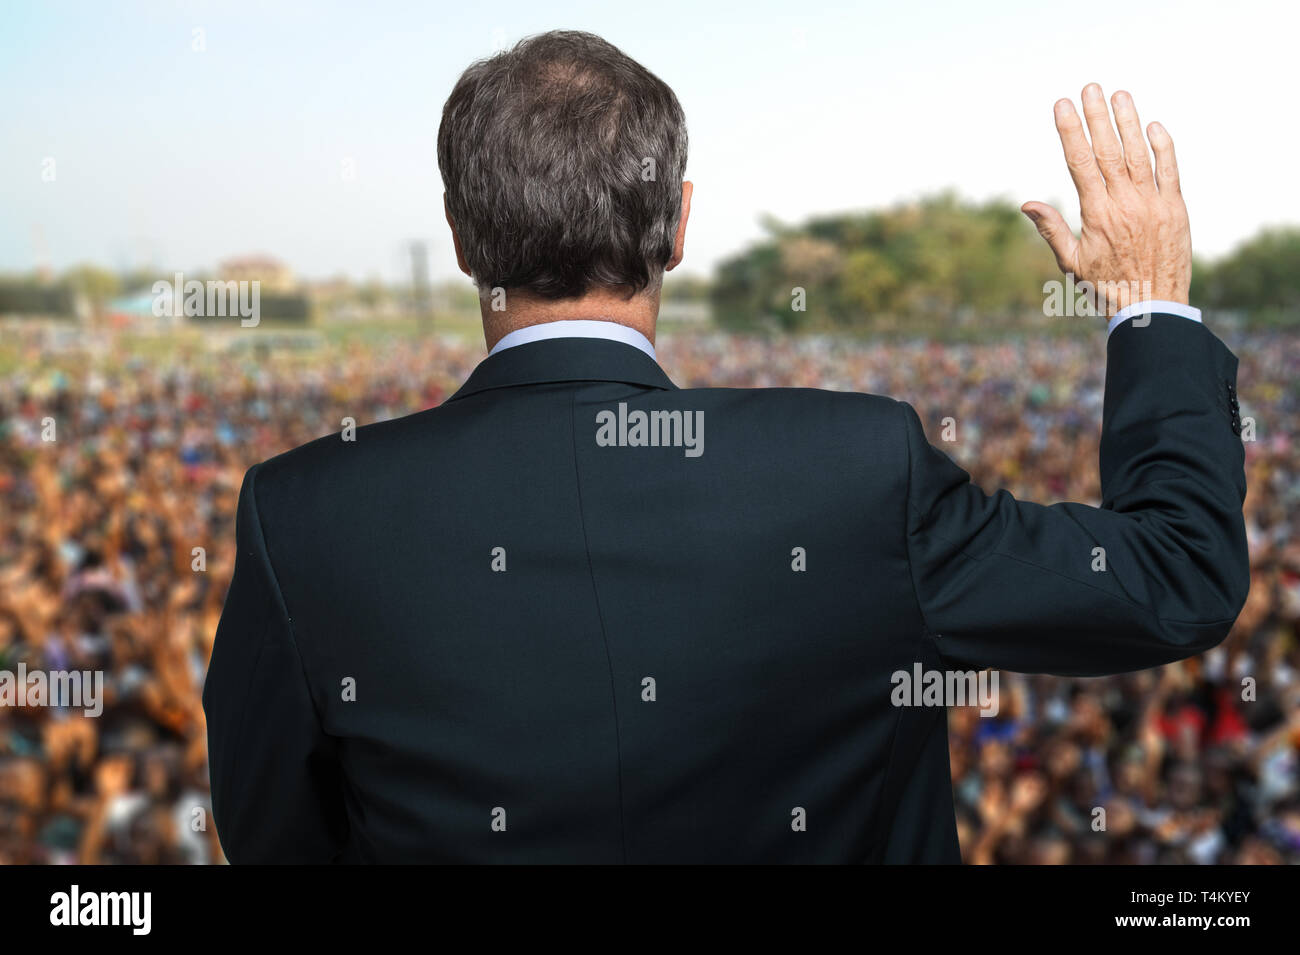 Politician talking and making an oath with his arm raised Stock Photo